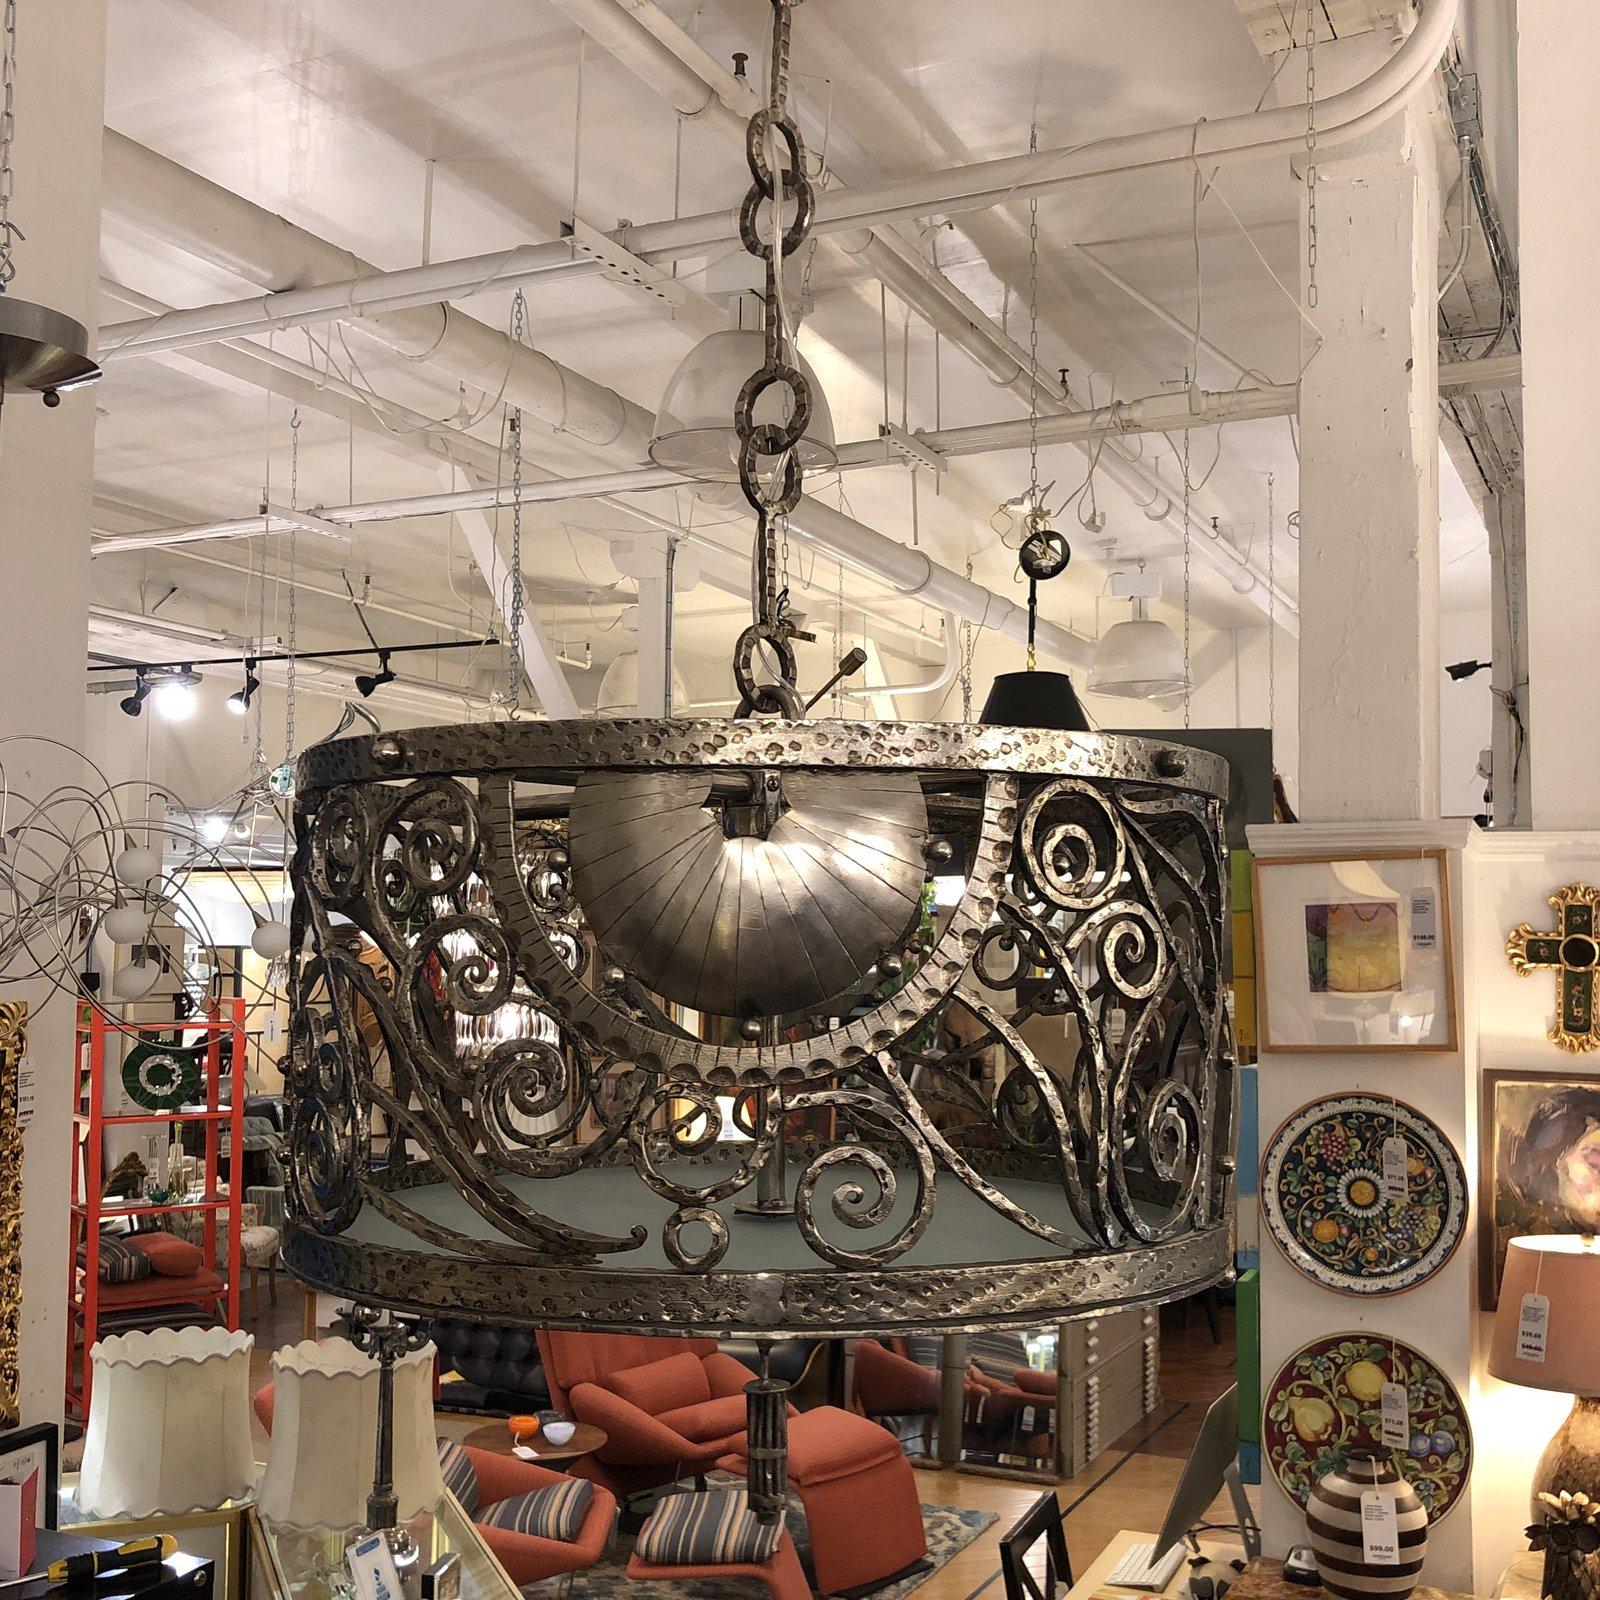 A custom metal drum chandelier. A sight of fine craftsmanship by skilled artisans. The drum is based on a multi designs of welded swirls and curves. The metal shows natural hammered technics. The bottom of the pendant has a frosted glass to